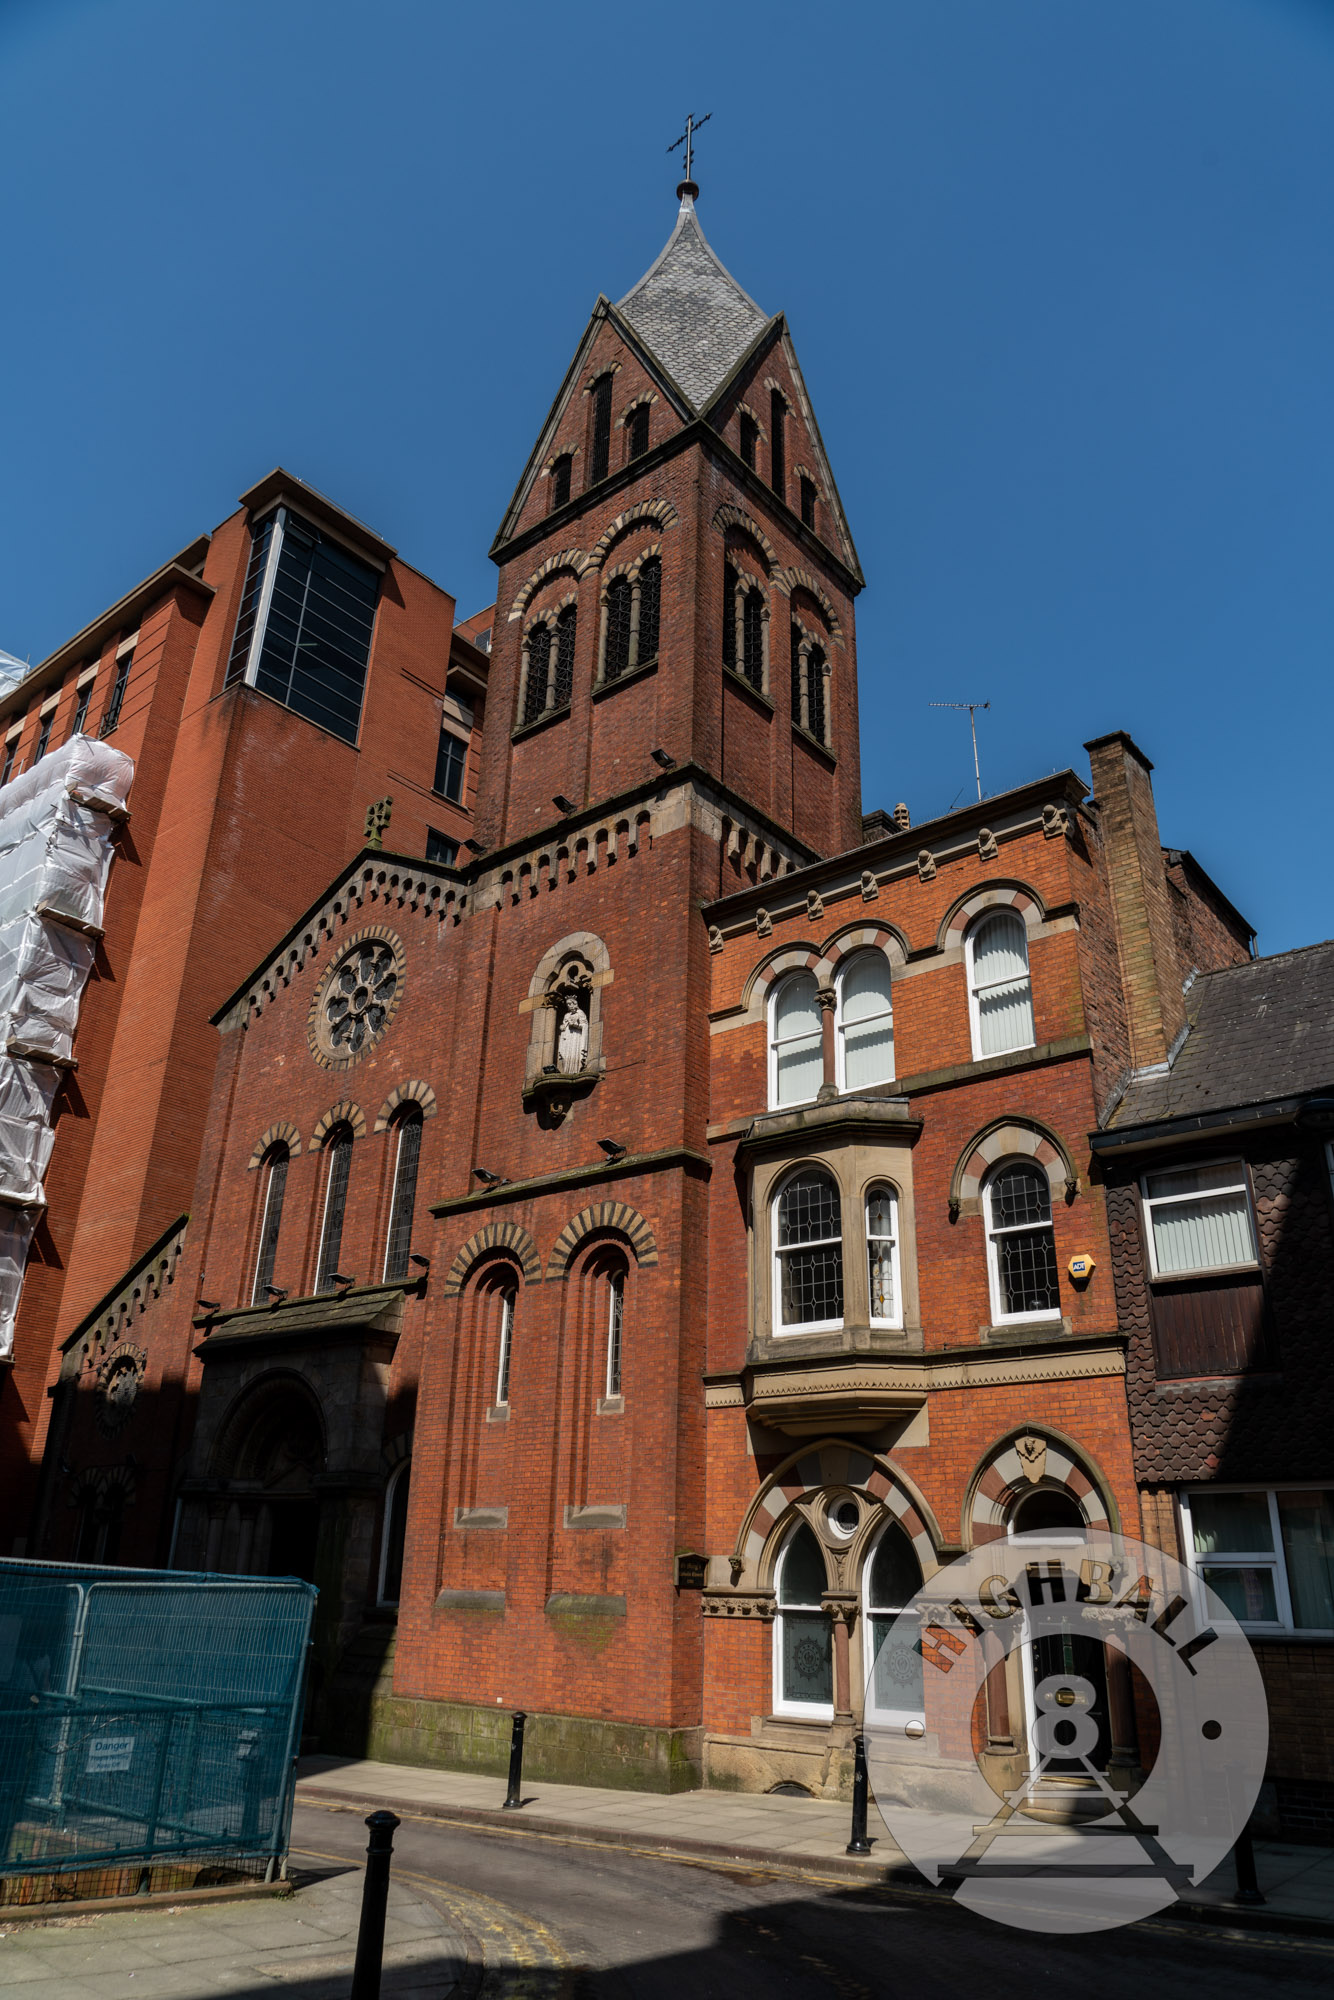 St. Mary's Church, known as the Hidden Gem, Mulberry Street, Manchester, England, UK, 2018.